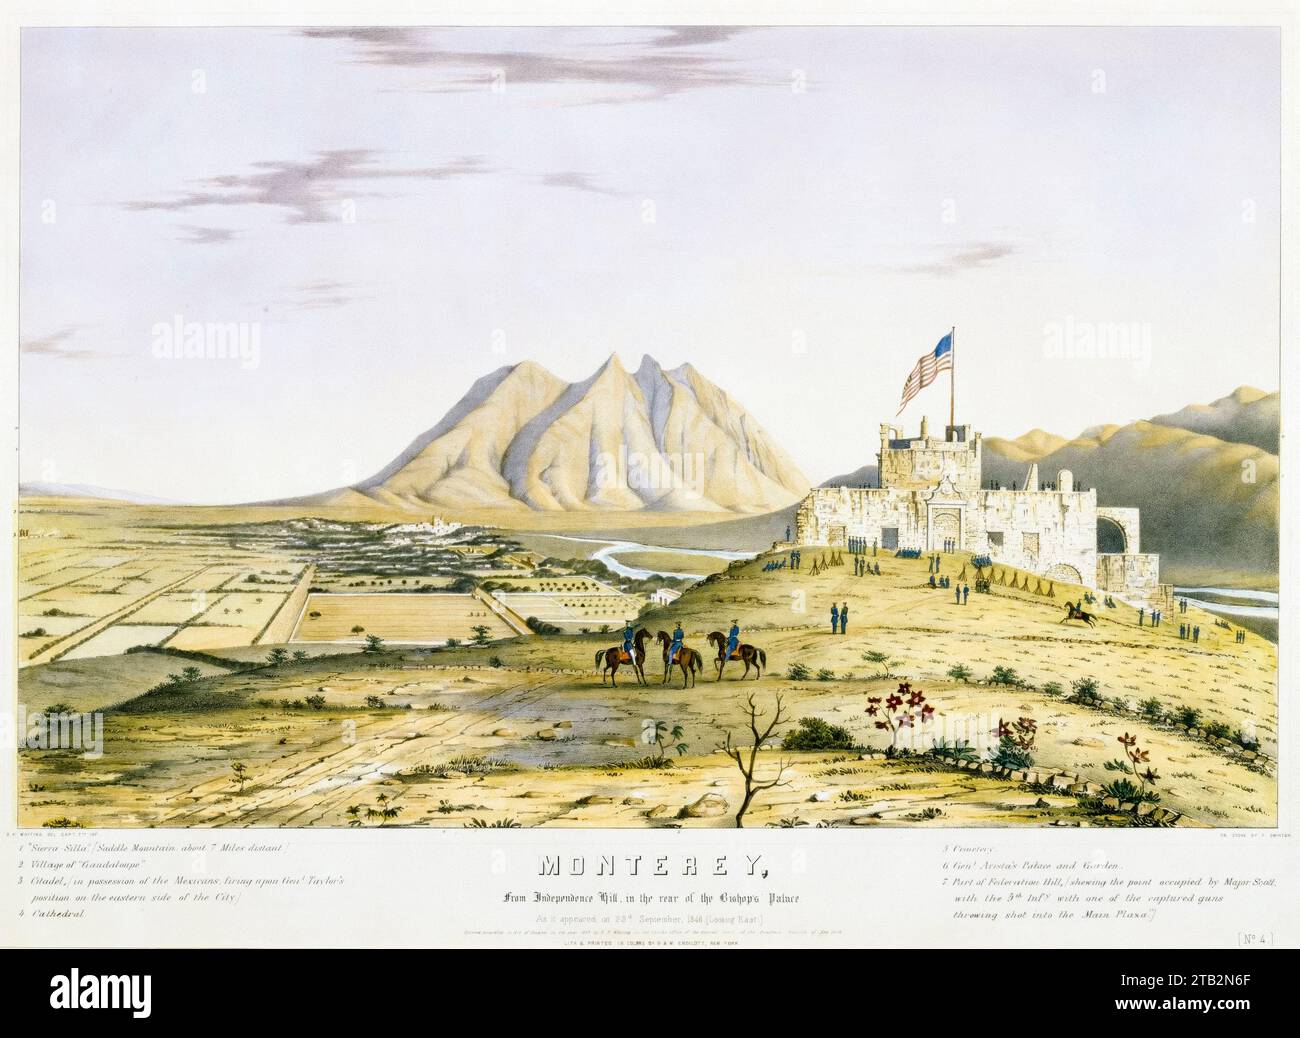 Monterey from Independence Hill in the rear of the Bishop's Palace, 23rd September 1846, with the village of Guadaloupe and Sierra Silla or Saddle Mountain in the distance, Mexican-American War (1846-1848), lithographic print by Frederick Swinton, 1847 Stock Photo